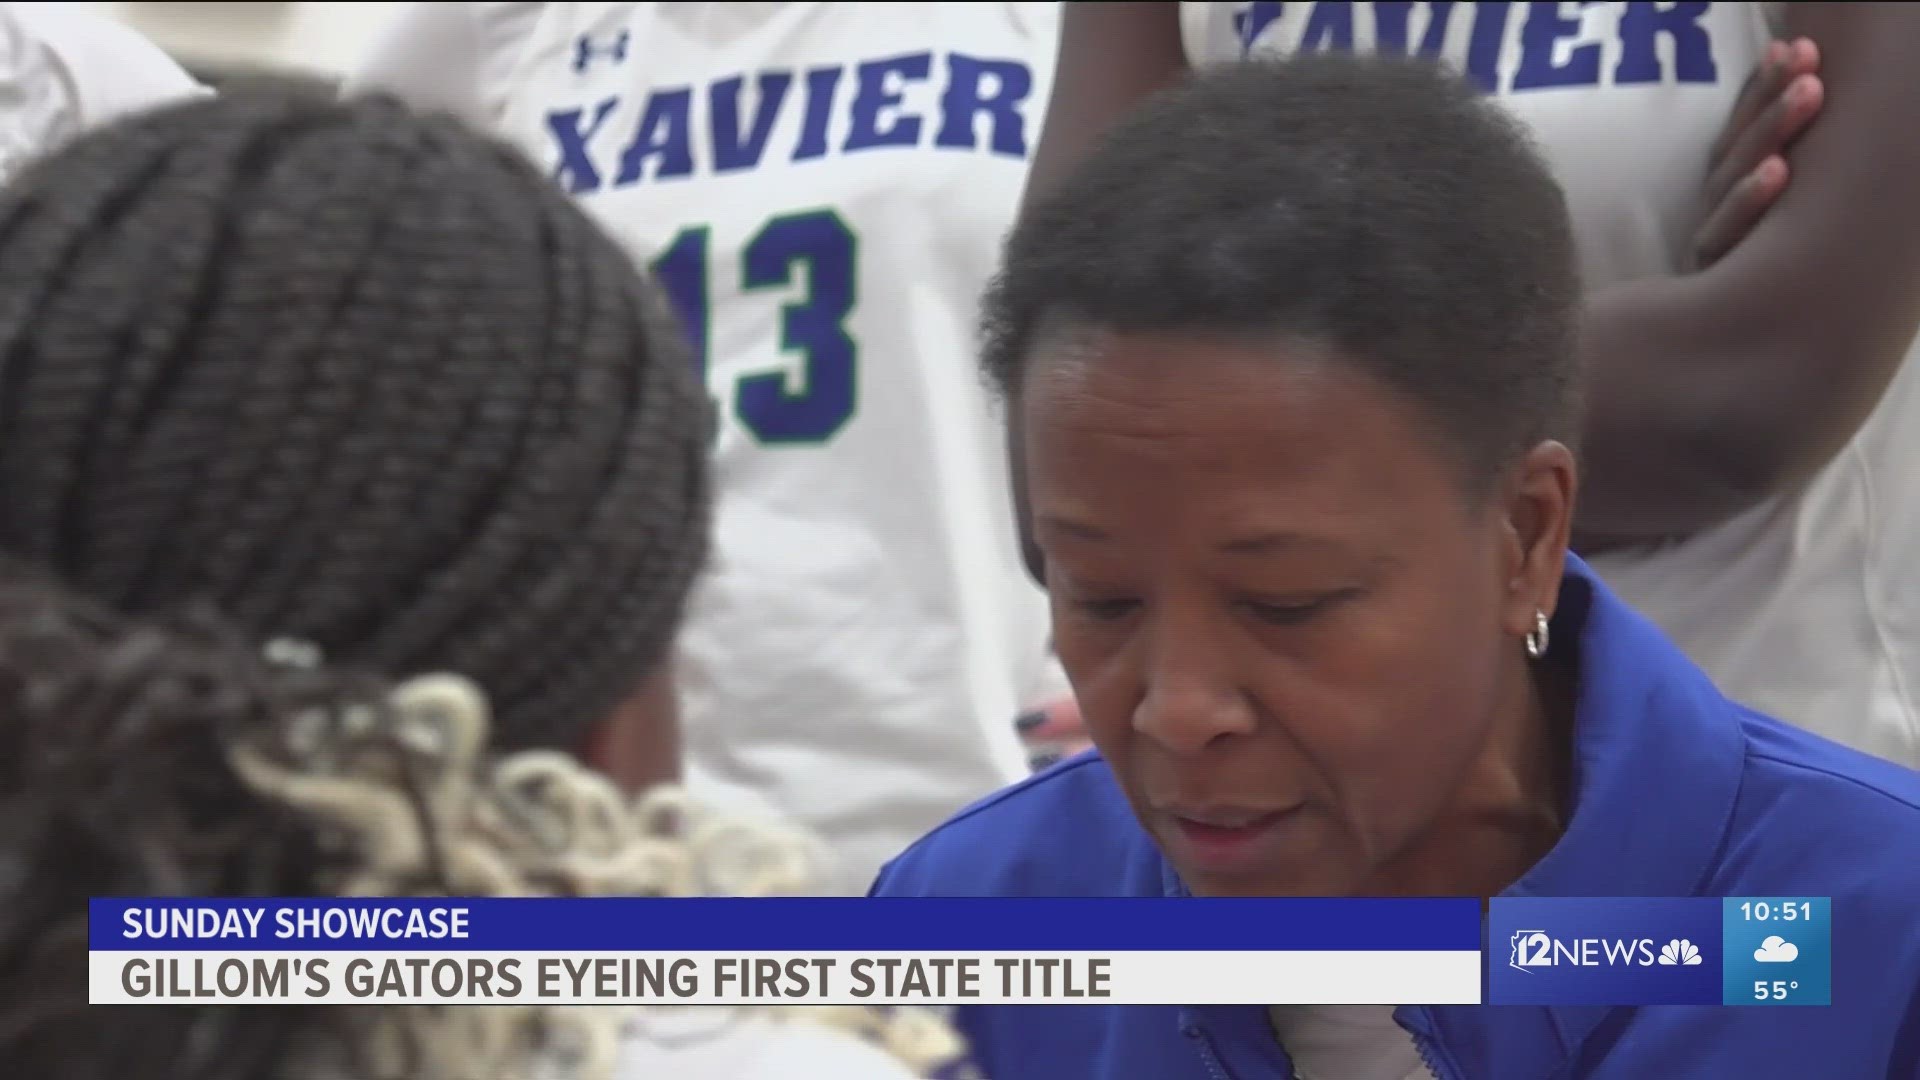 Jennifer Gillom, a 2-time gold medalist and 3-time Hall of Famer, is looking to make history, winning a state title with Xavier College Prep.